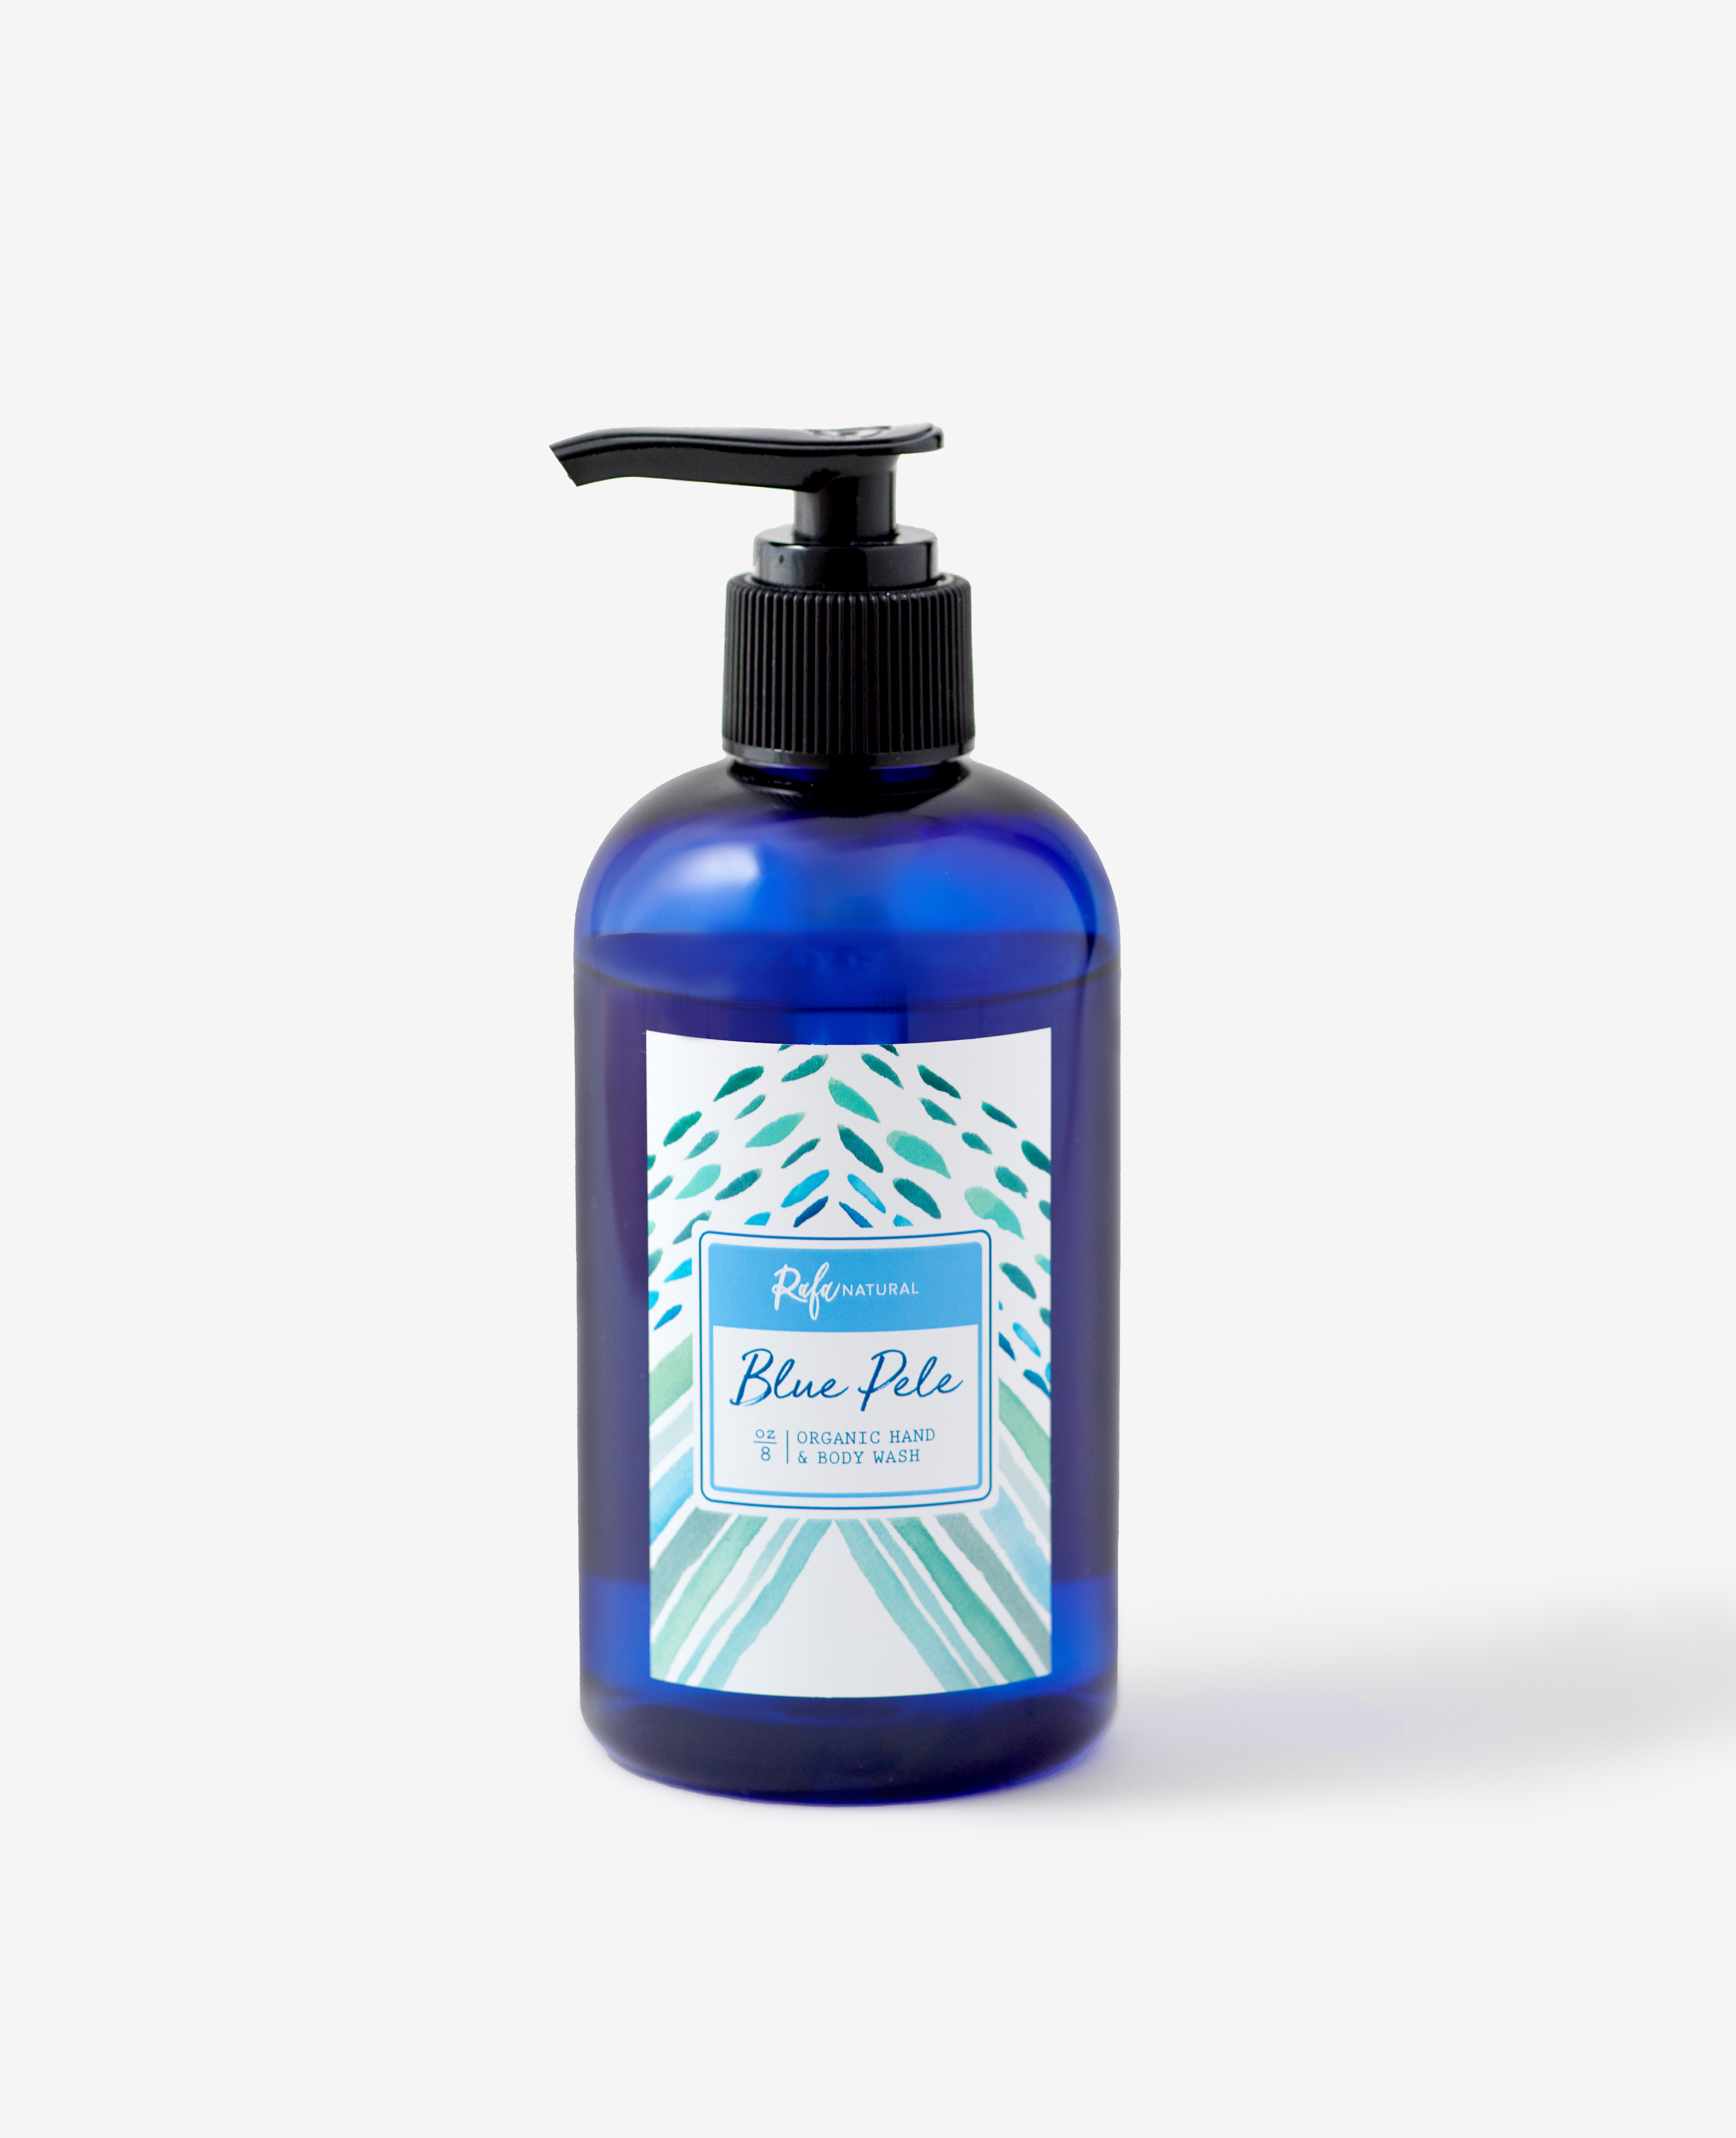 Blue_Pele_Organic_Hand_Body_Wash_Cropped.png